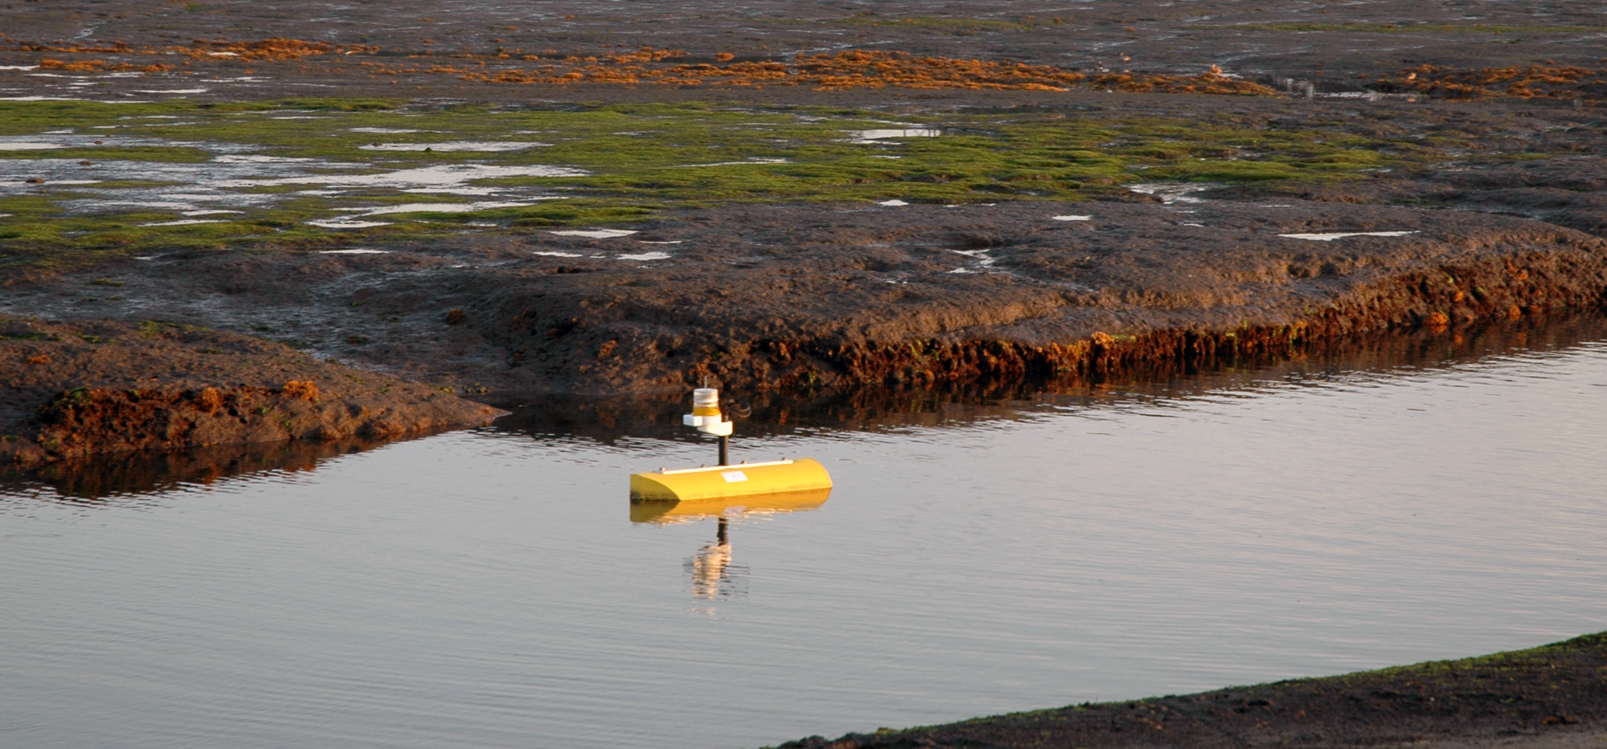 The Land/Ocean Biogeochemical Observatory (LOBO), pictured here in Elkhorn Slough, is a networked mooring system for continuous monitoring of complex cycles being commercialized by Satlantic.